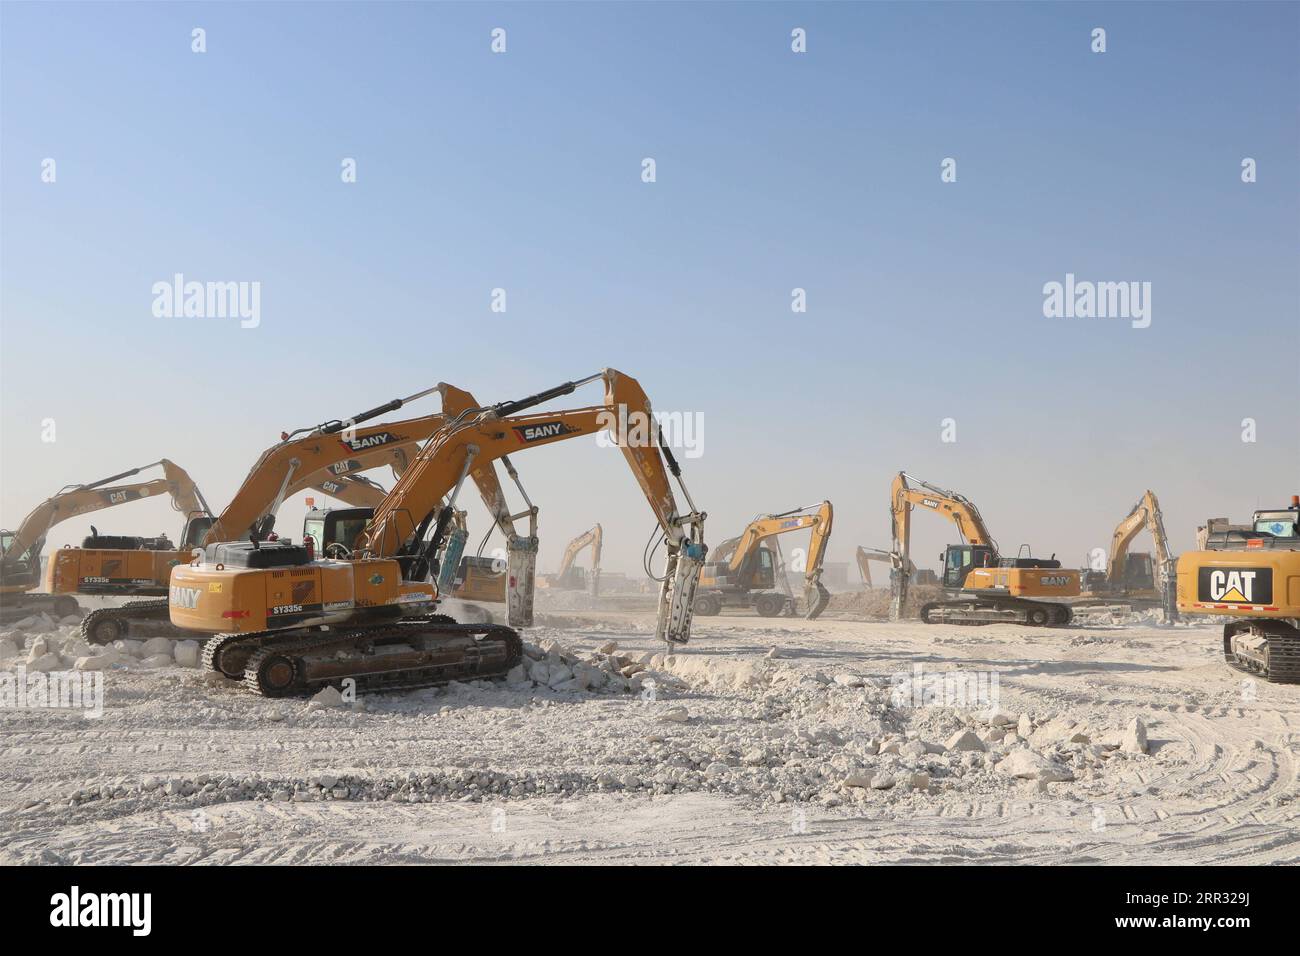 201020 -- JAHRA GOVERNORATE, Oct. 20, 2020 -- Construction machines work at the construction site of a project of China Gezhouba Group Corporation CGGC in desert of Jahra Governorate, Kuwait, Oct. 18, 2020. China Gezhouba Group Corporation CGGC handed over on Tuesday the first batch of its housing infrastructure project to the Kuwaiti side, injecting new momentum into Kuwait s economy and livelihood. Photo by /Xinhua KUWAIT-JAHRA GOVERNORATE-CHINESE COMPANY-PROJECT LiuxLianghaoyue PUBLICATIONxNOTxINxCHN Stock Photo